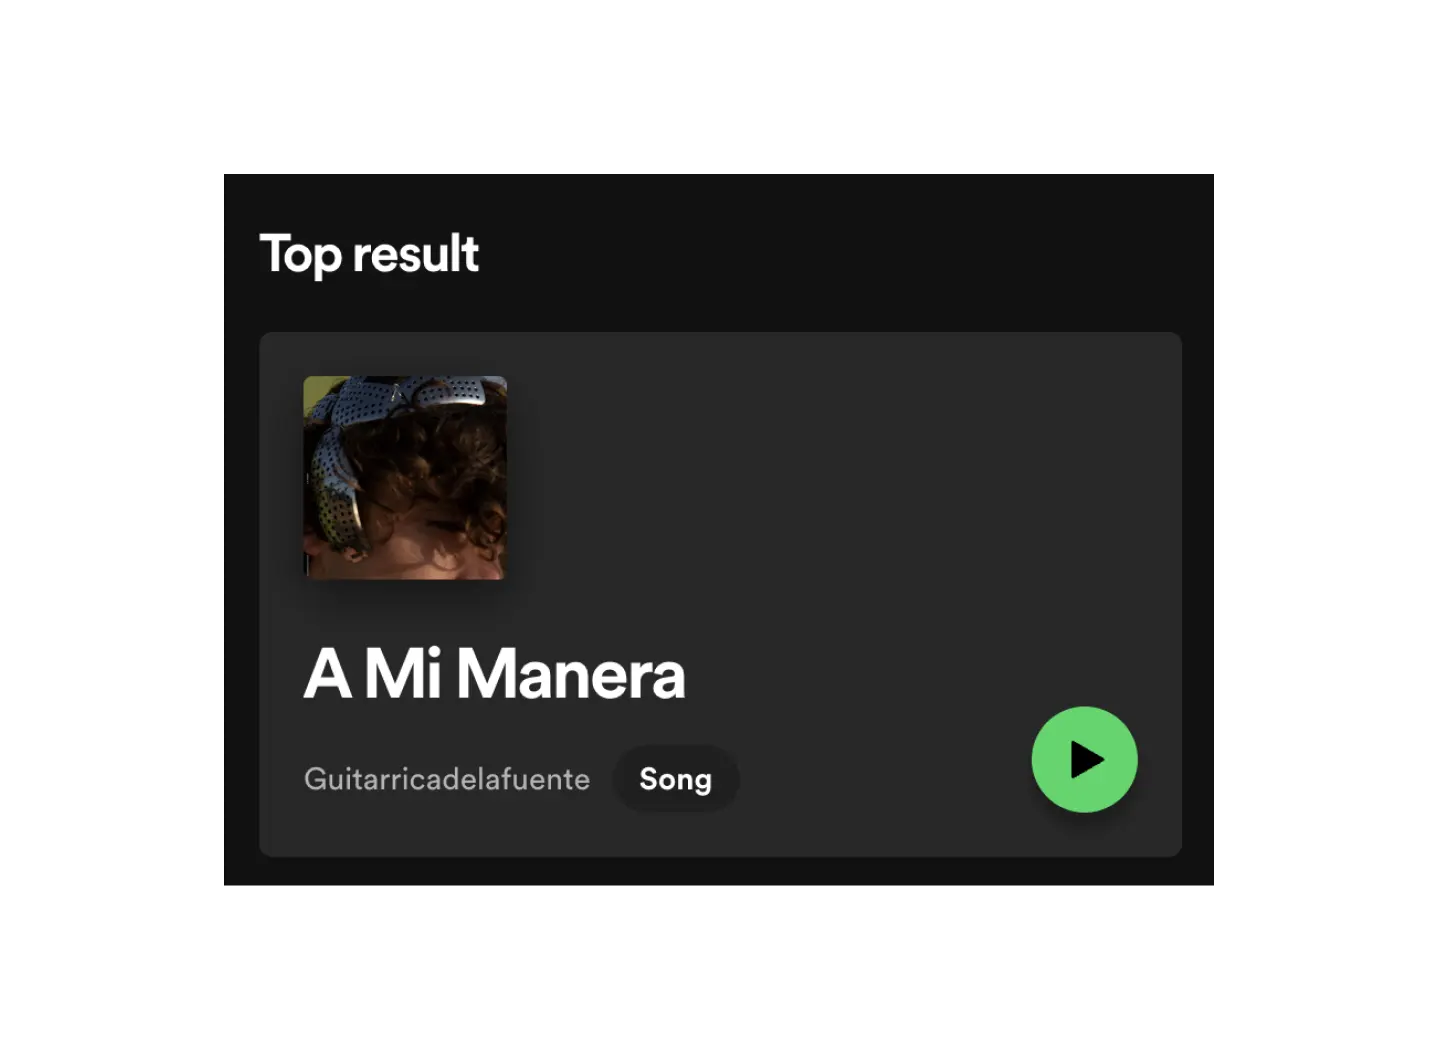 Screenshot of A mi manera song from Spotify